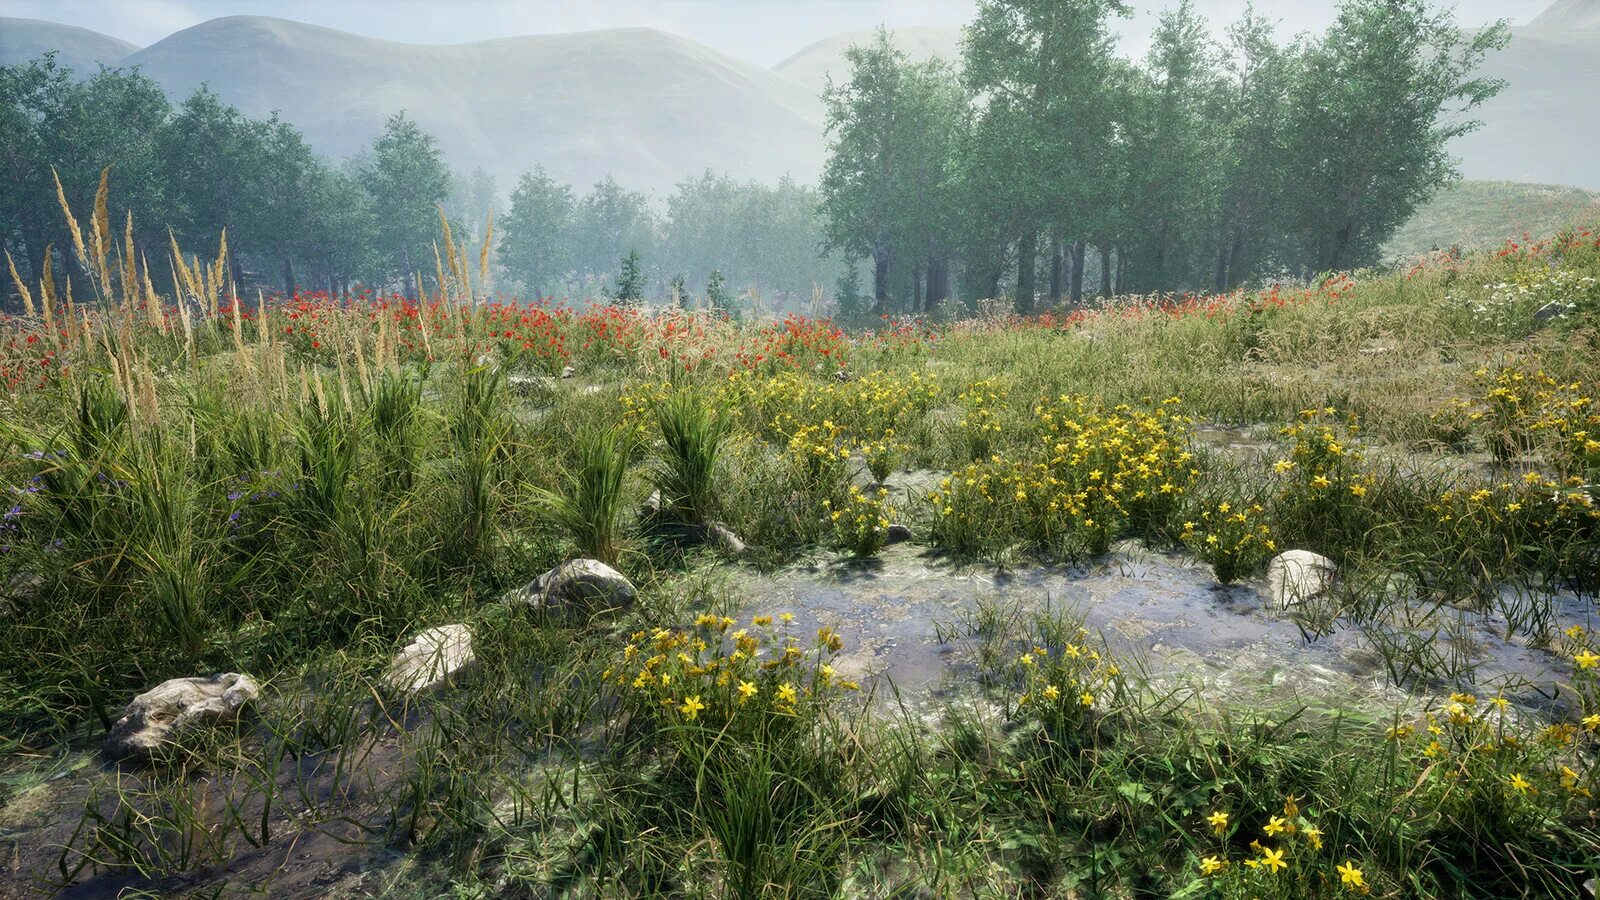 Natural v. Meadow Sisto. Meadow environment - Dynamic nature v1.0.1. Sunny Meadows Генератор. Woods Meadow Lakeside.